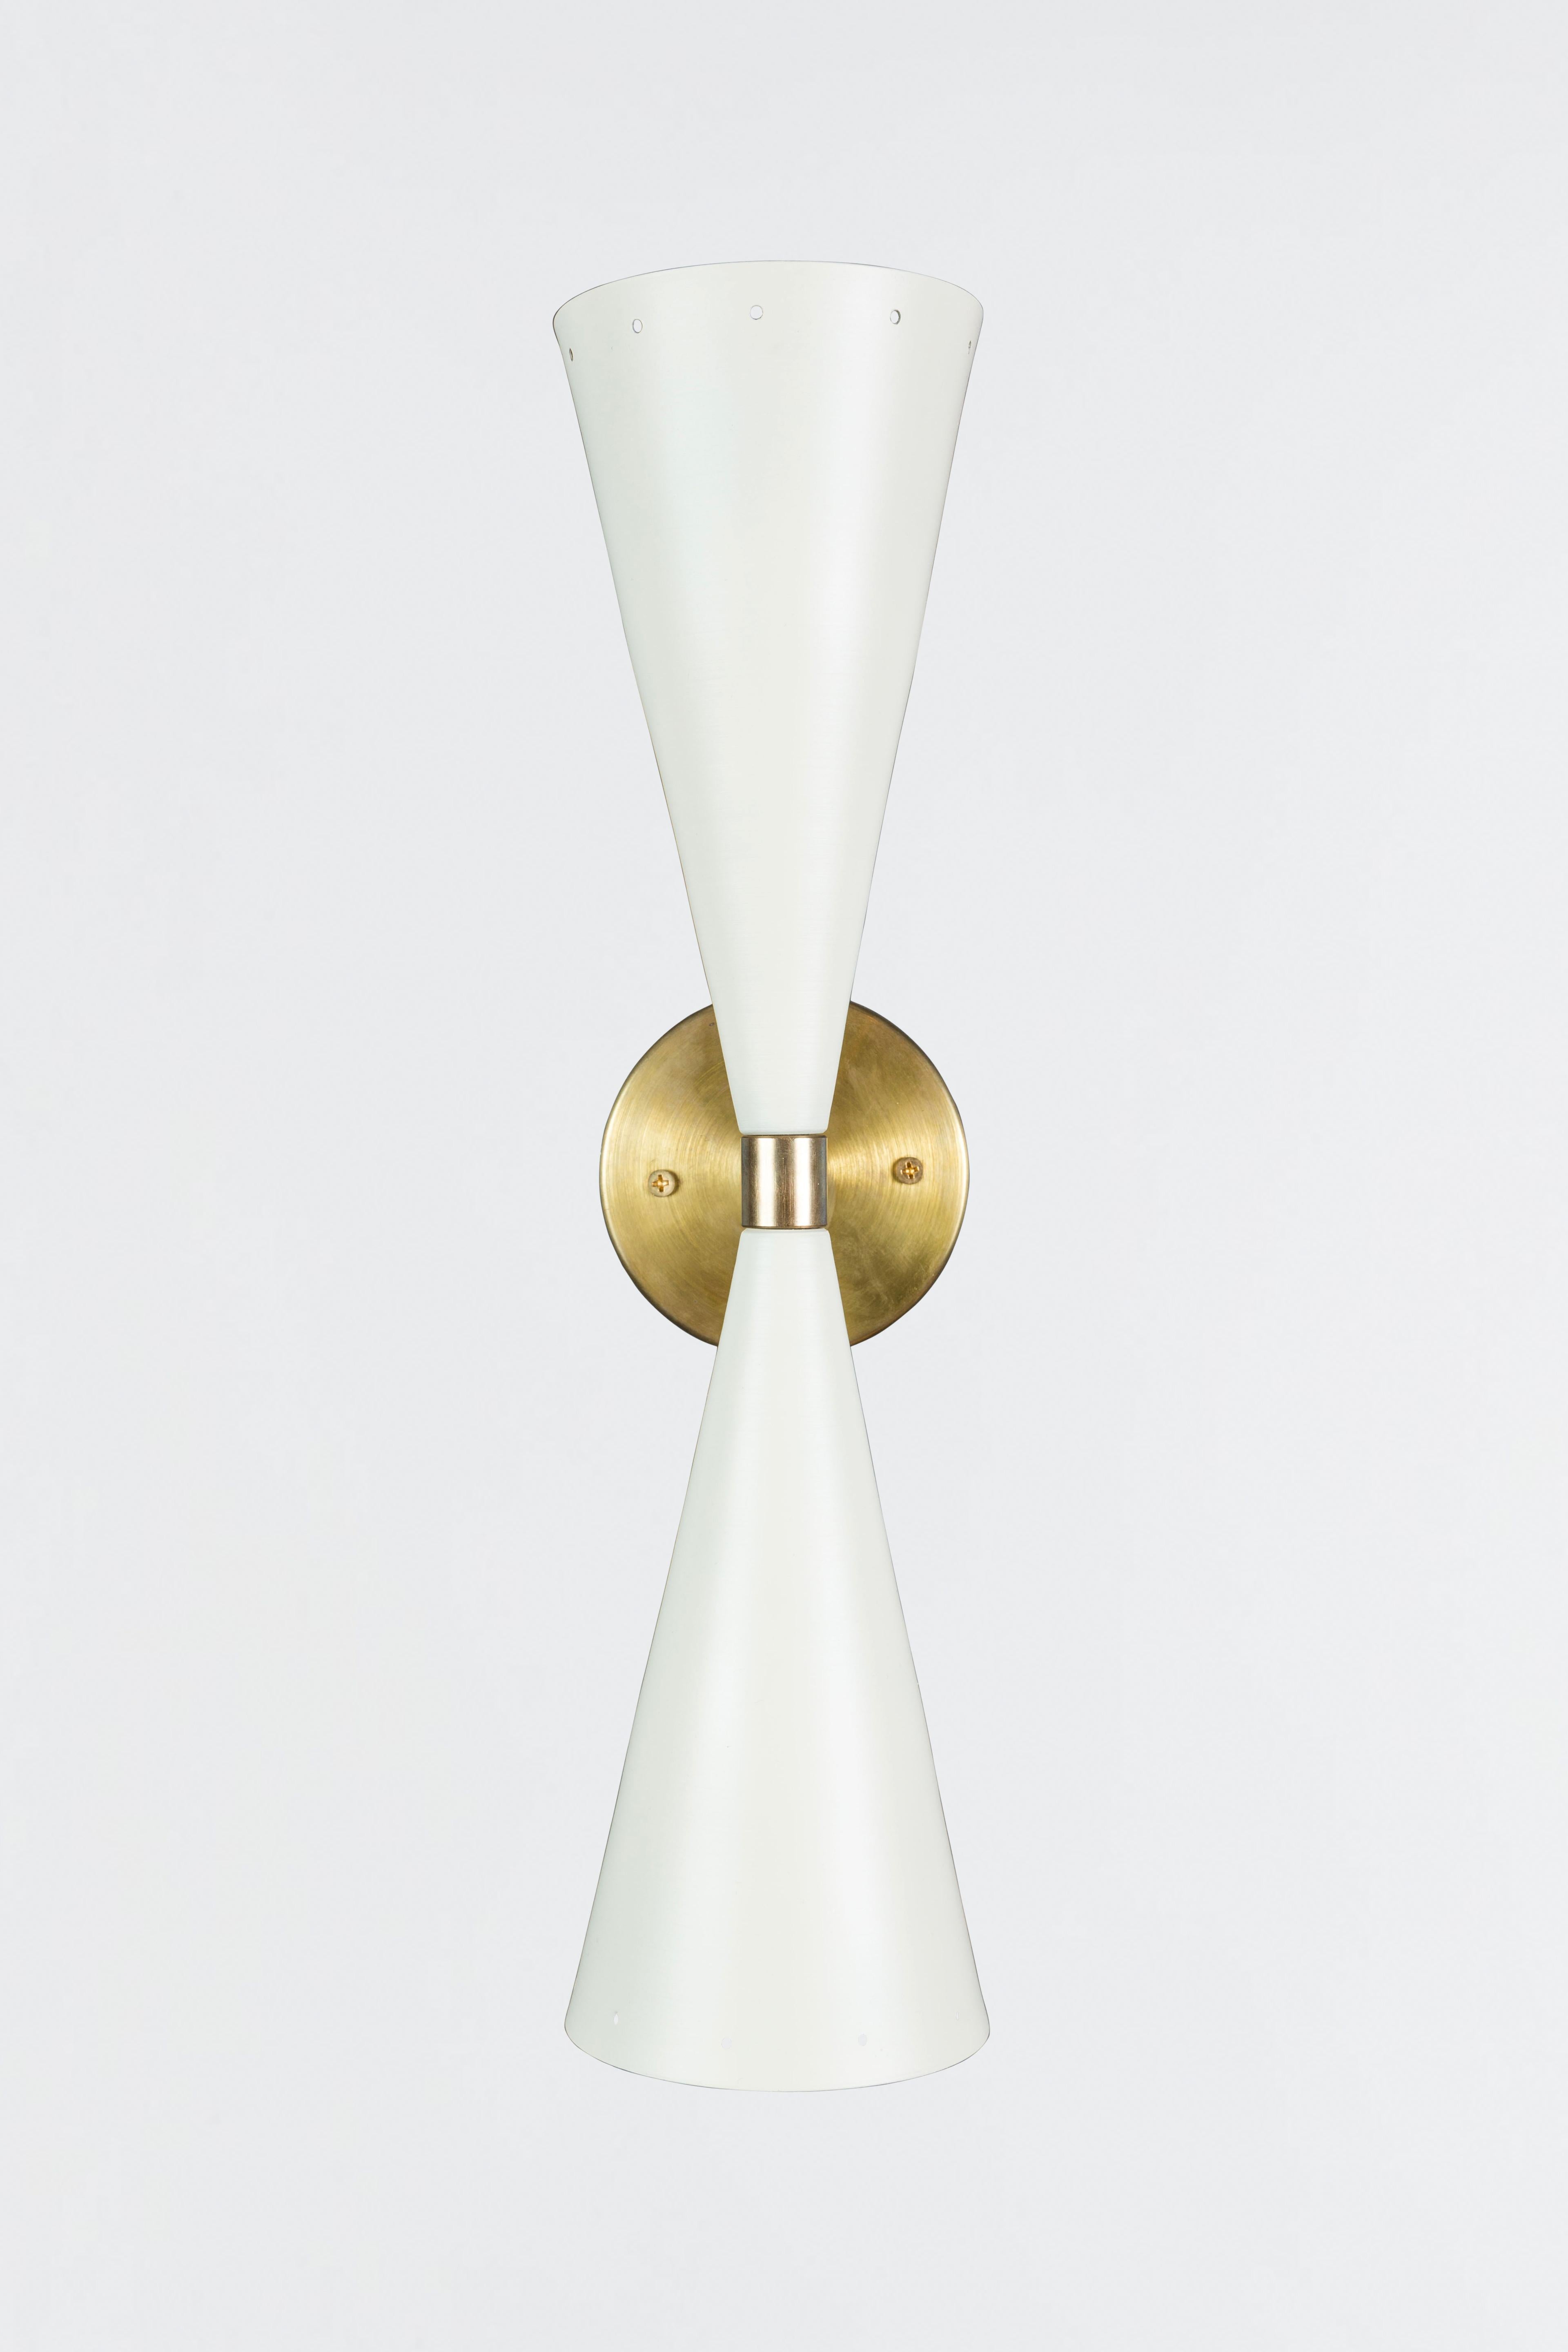 Steel Black and Brass Double Cone Sconce by Lawson-Fenning For Sale